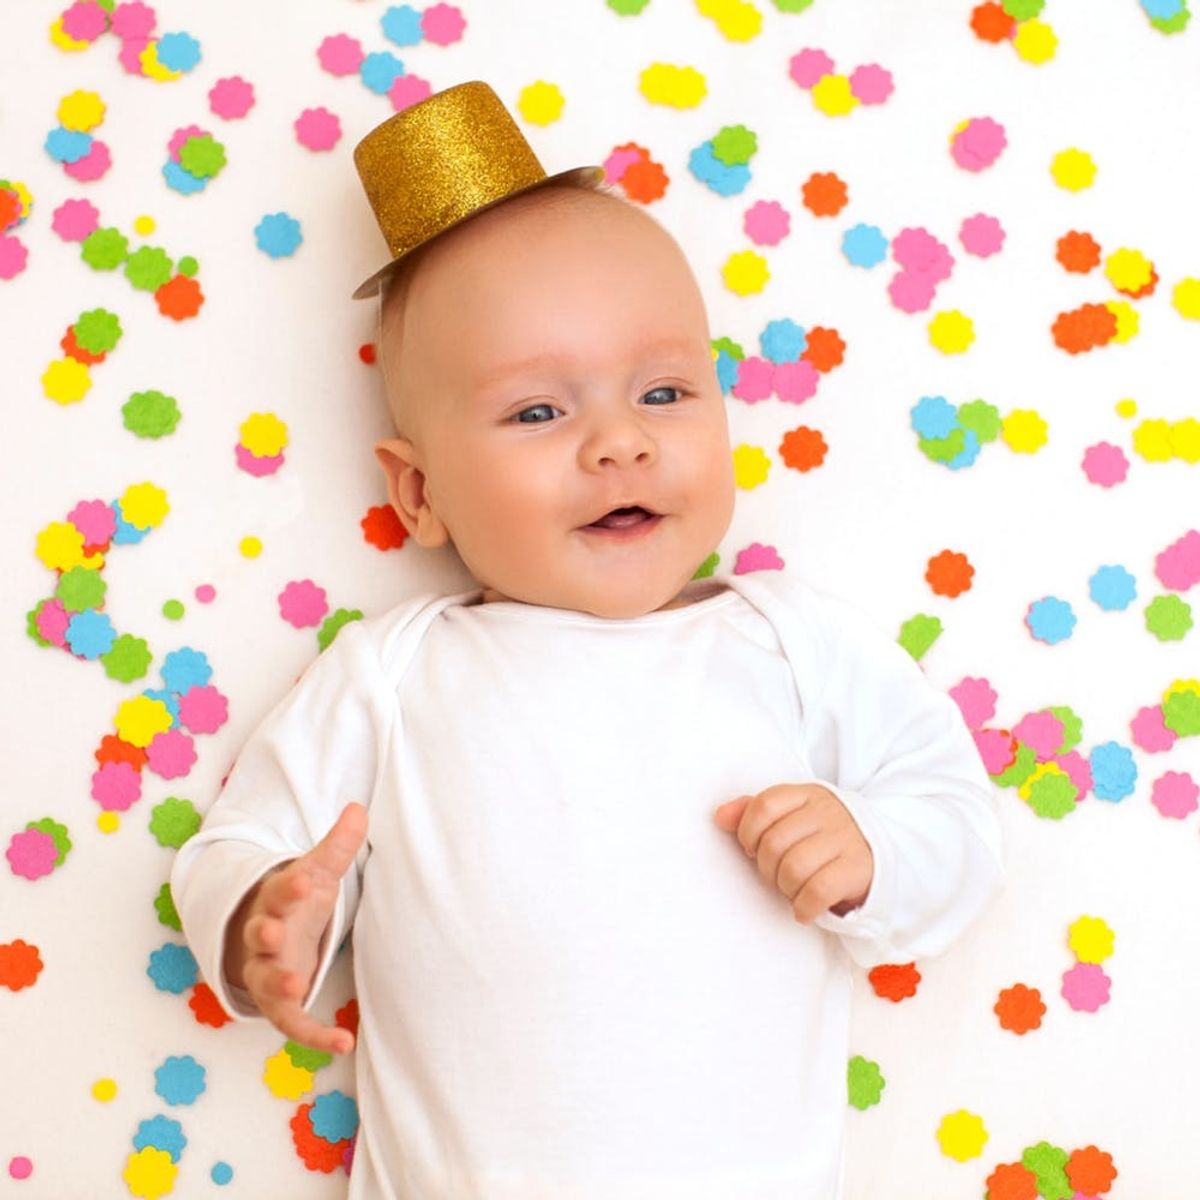 9 Perfect Moments to Share Your Baby’s Name